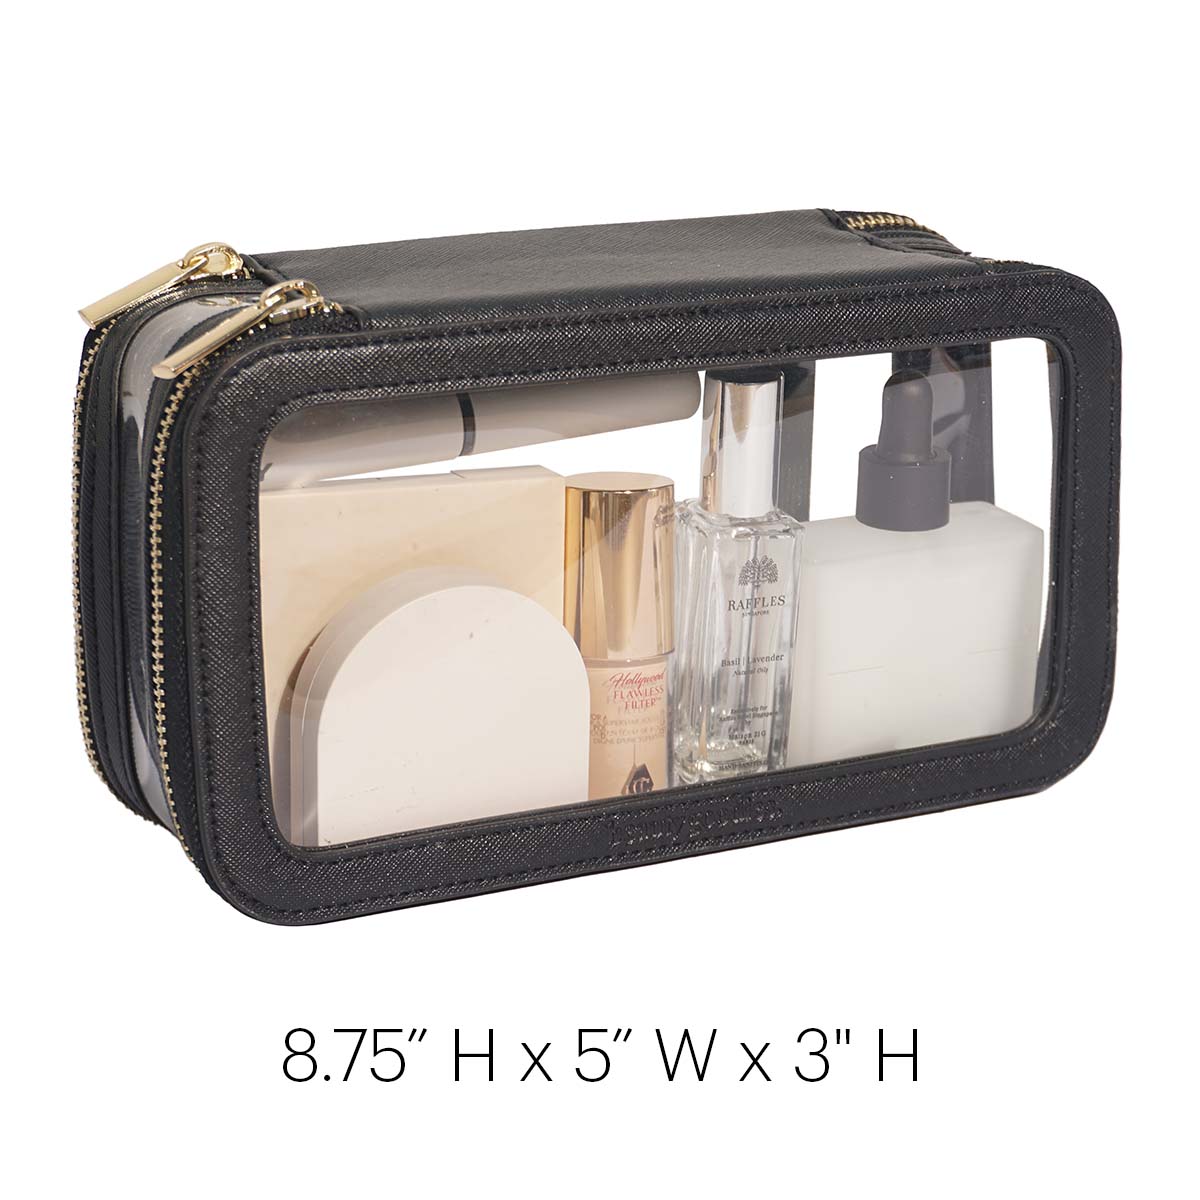 Our bestselling clear makeup case: The Jetset. #jetsetter #clarity Image  via Truffle girl @realskindiaries | Instagram